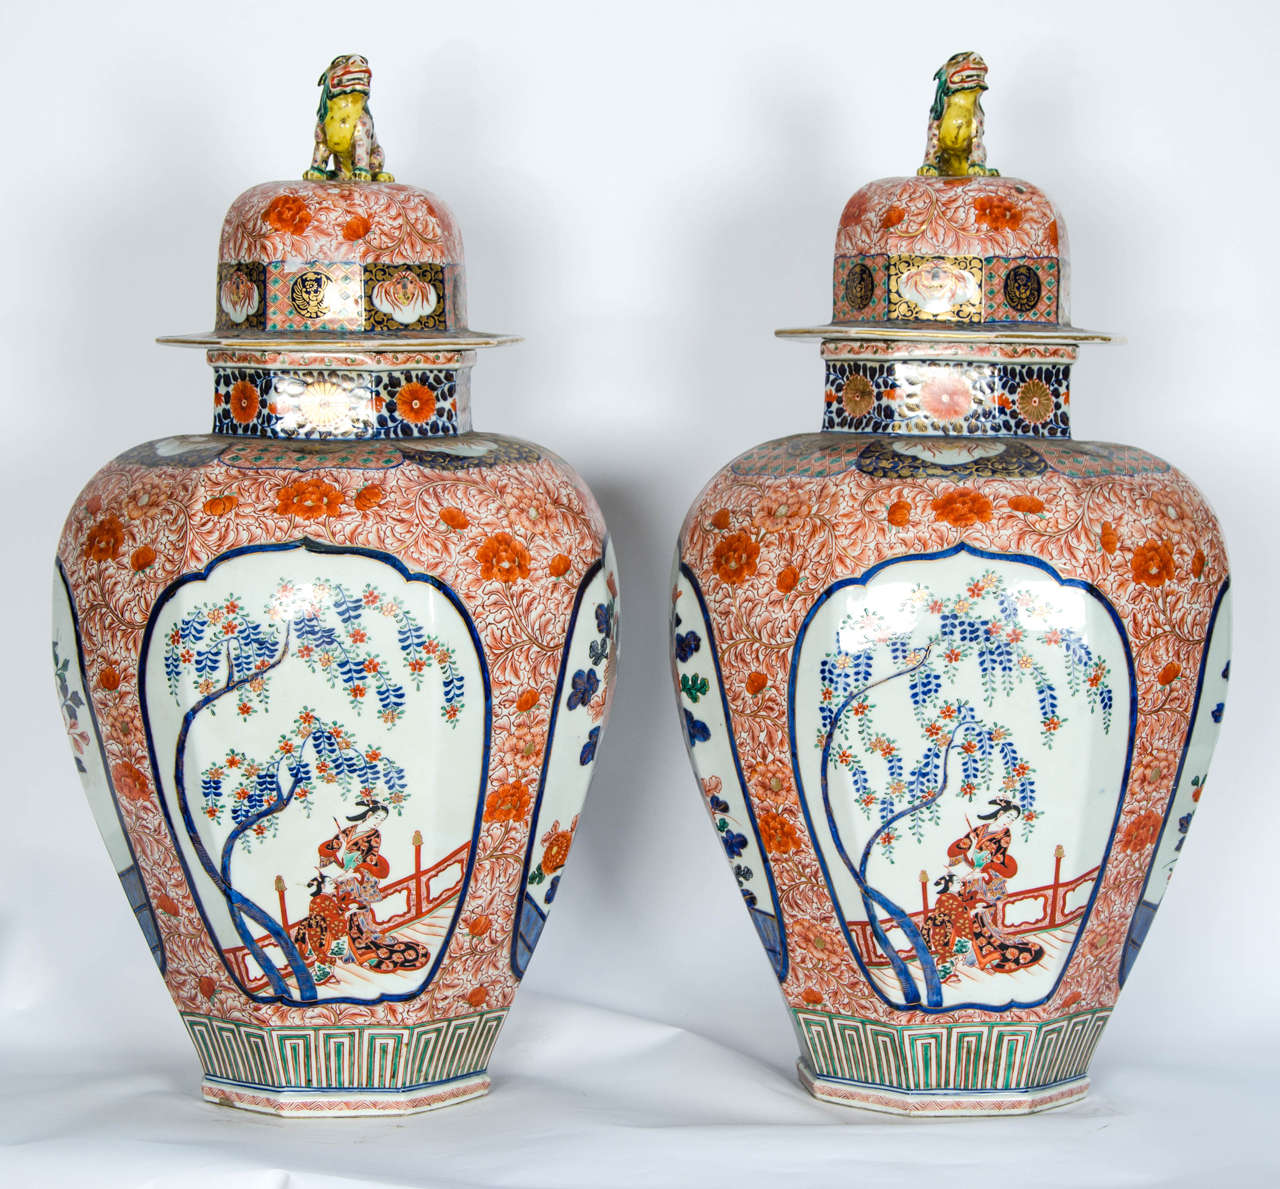 A large and impressive pair of 19th century Japanese Imari lidded vases, having dogs of faux to the lids, hand-painted floral panels and surrounds of wisteria and chrysanthemums.